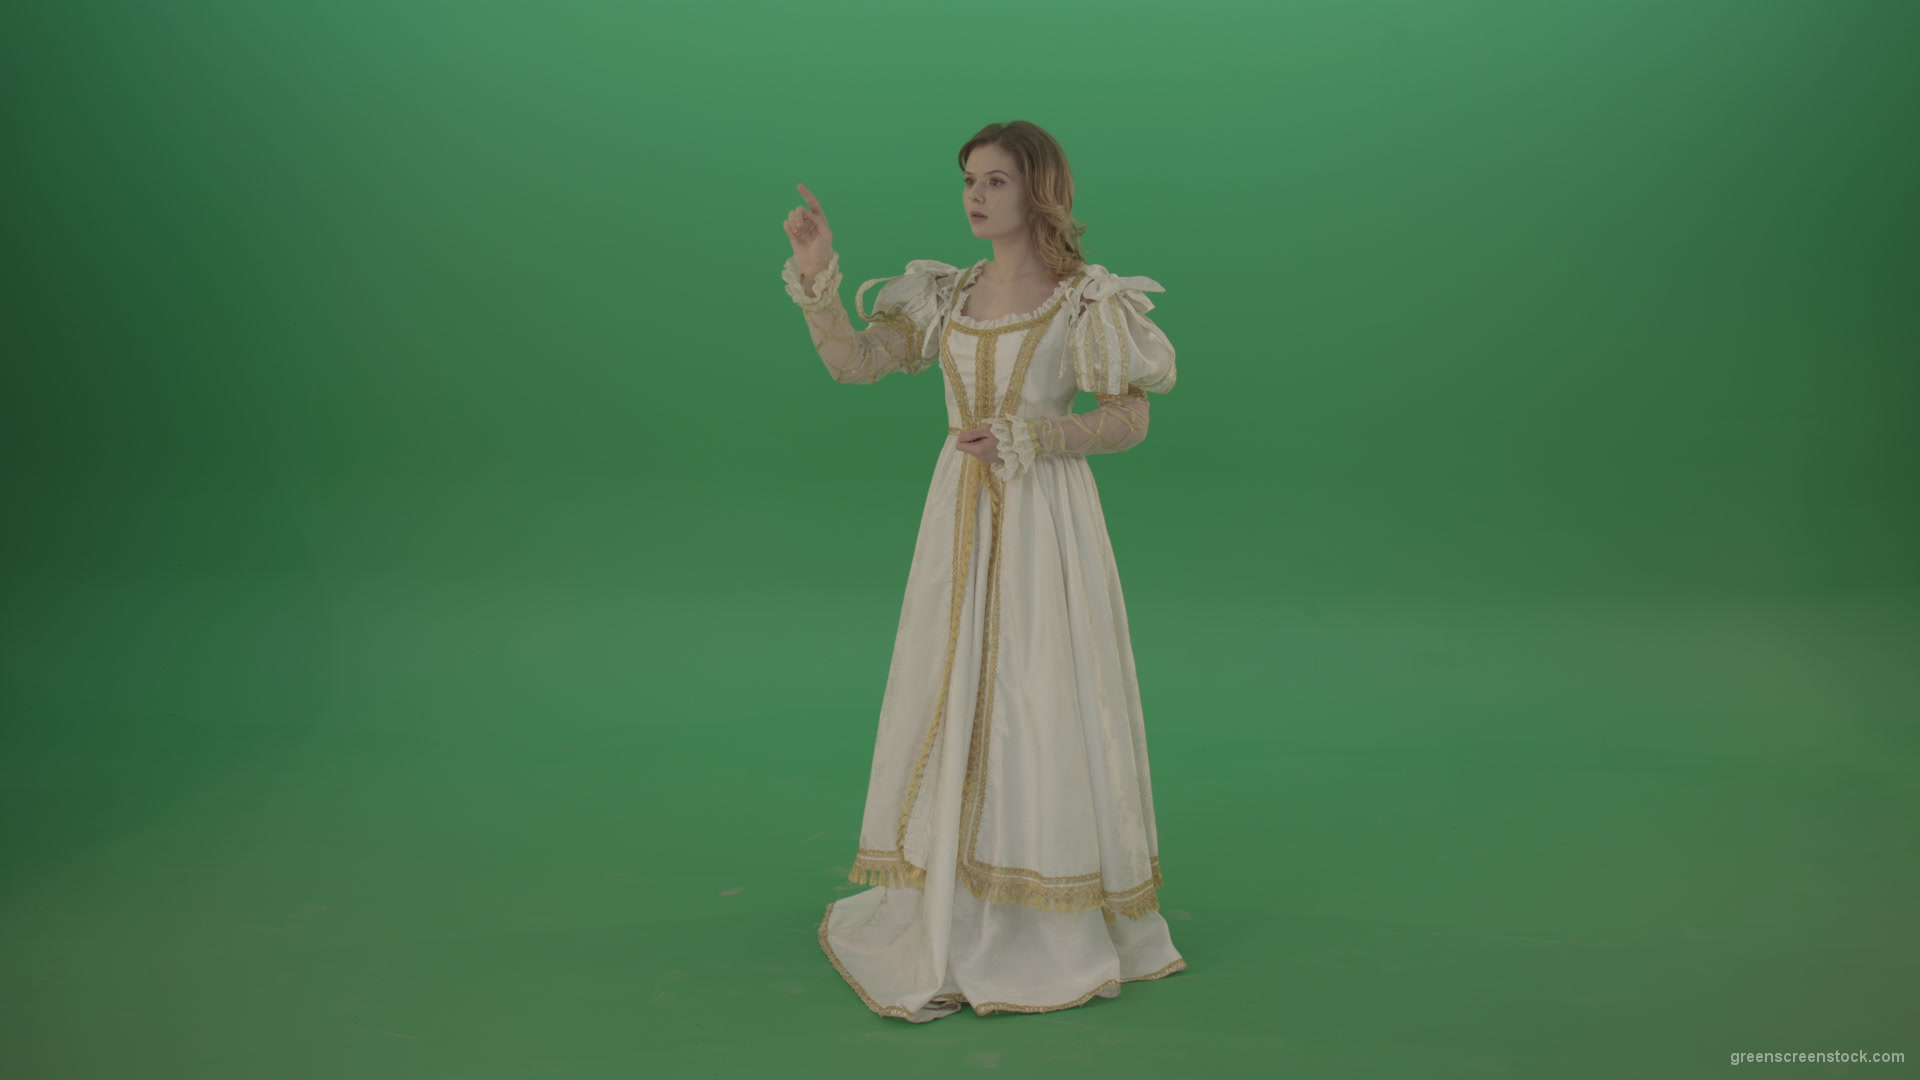 Flips-the-touchscreen-princess-in-a-white-dress-isolated-on-green-screen_006 Green Screen Stock